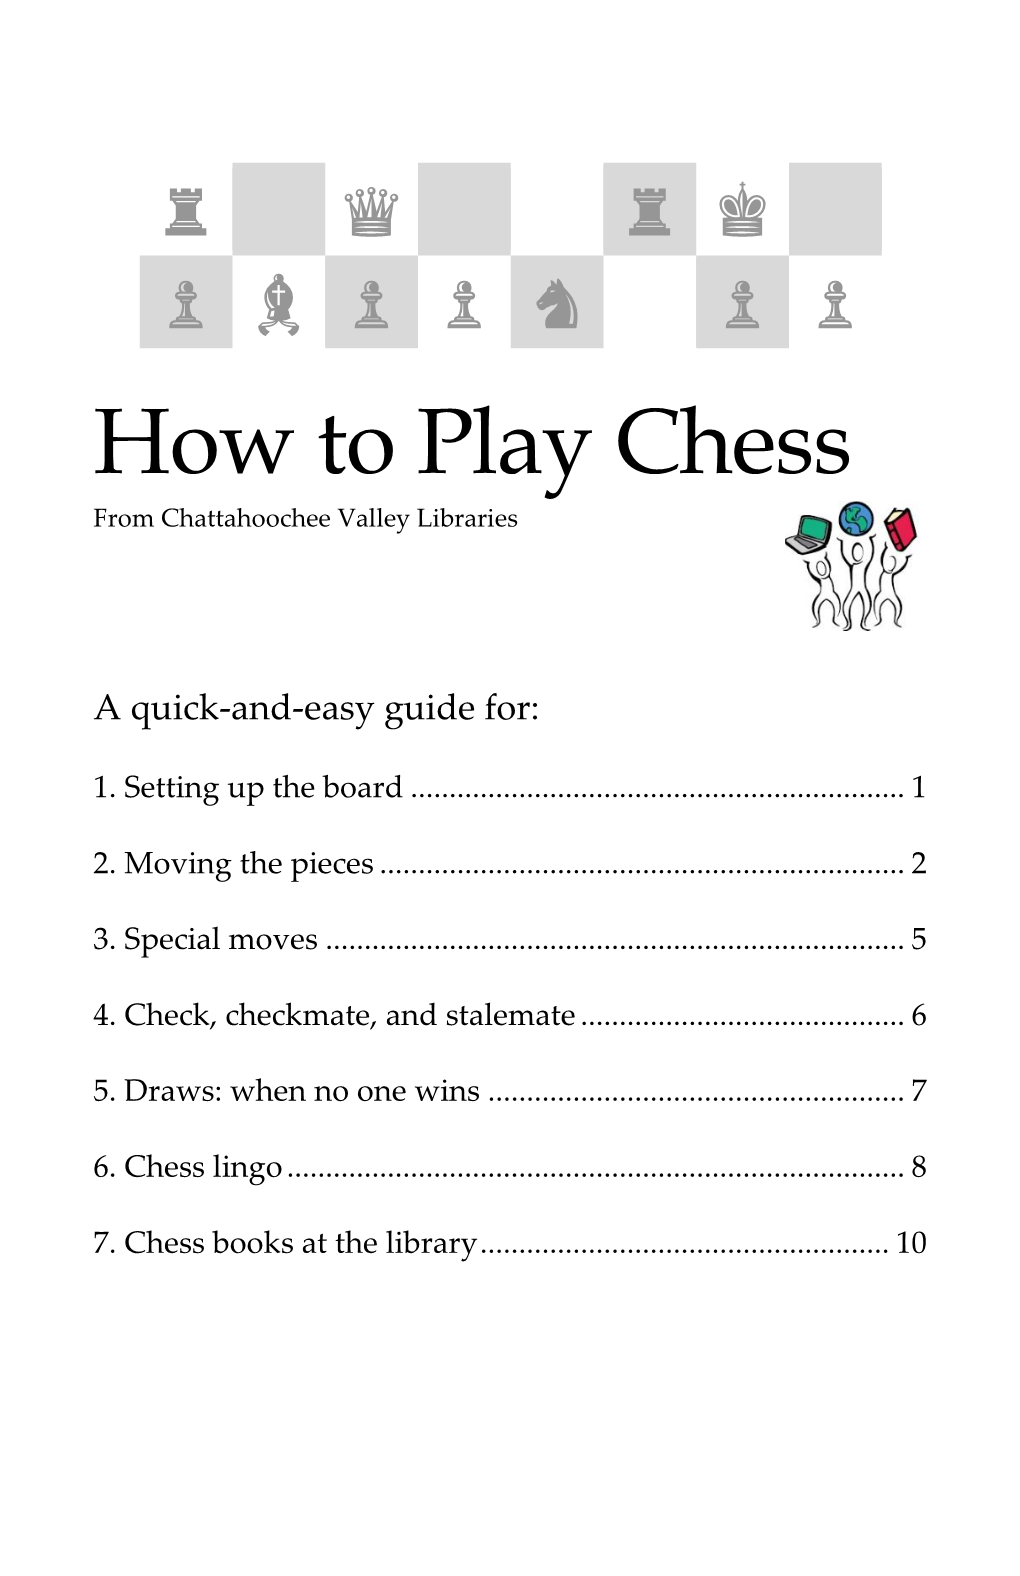 How to Play Chess from Chattahoochee Valley Libraries